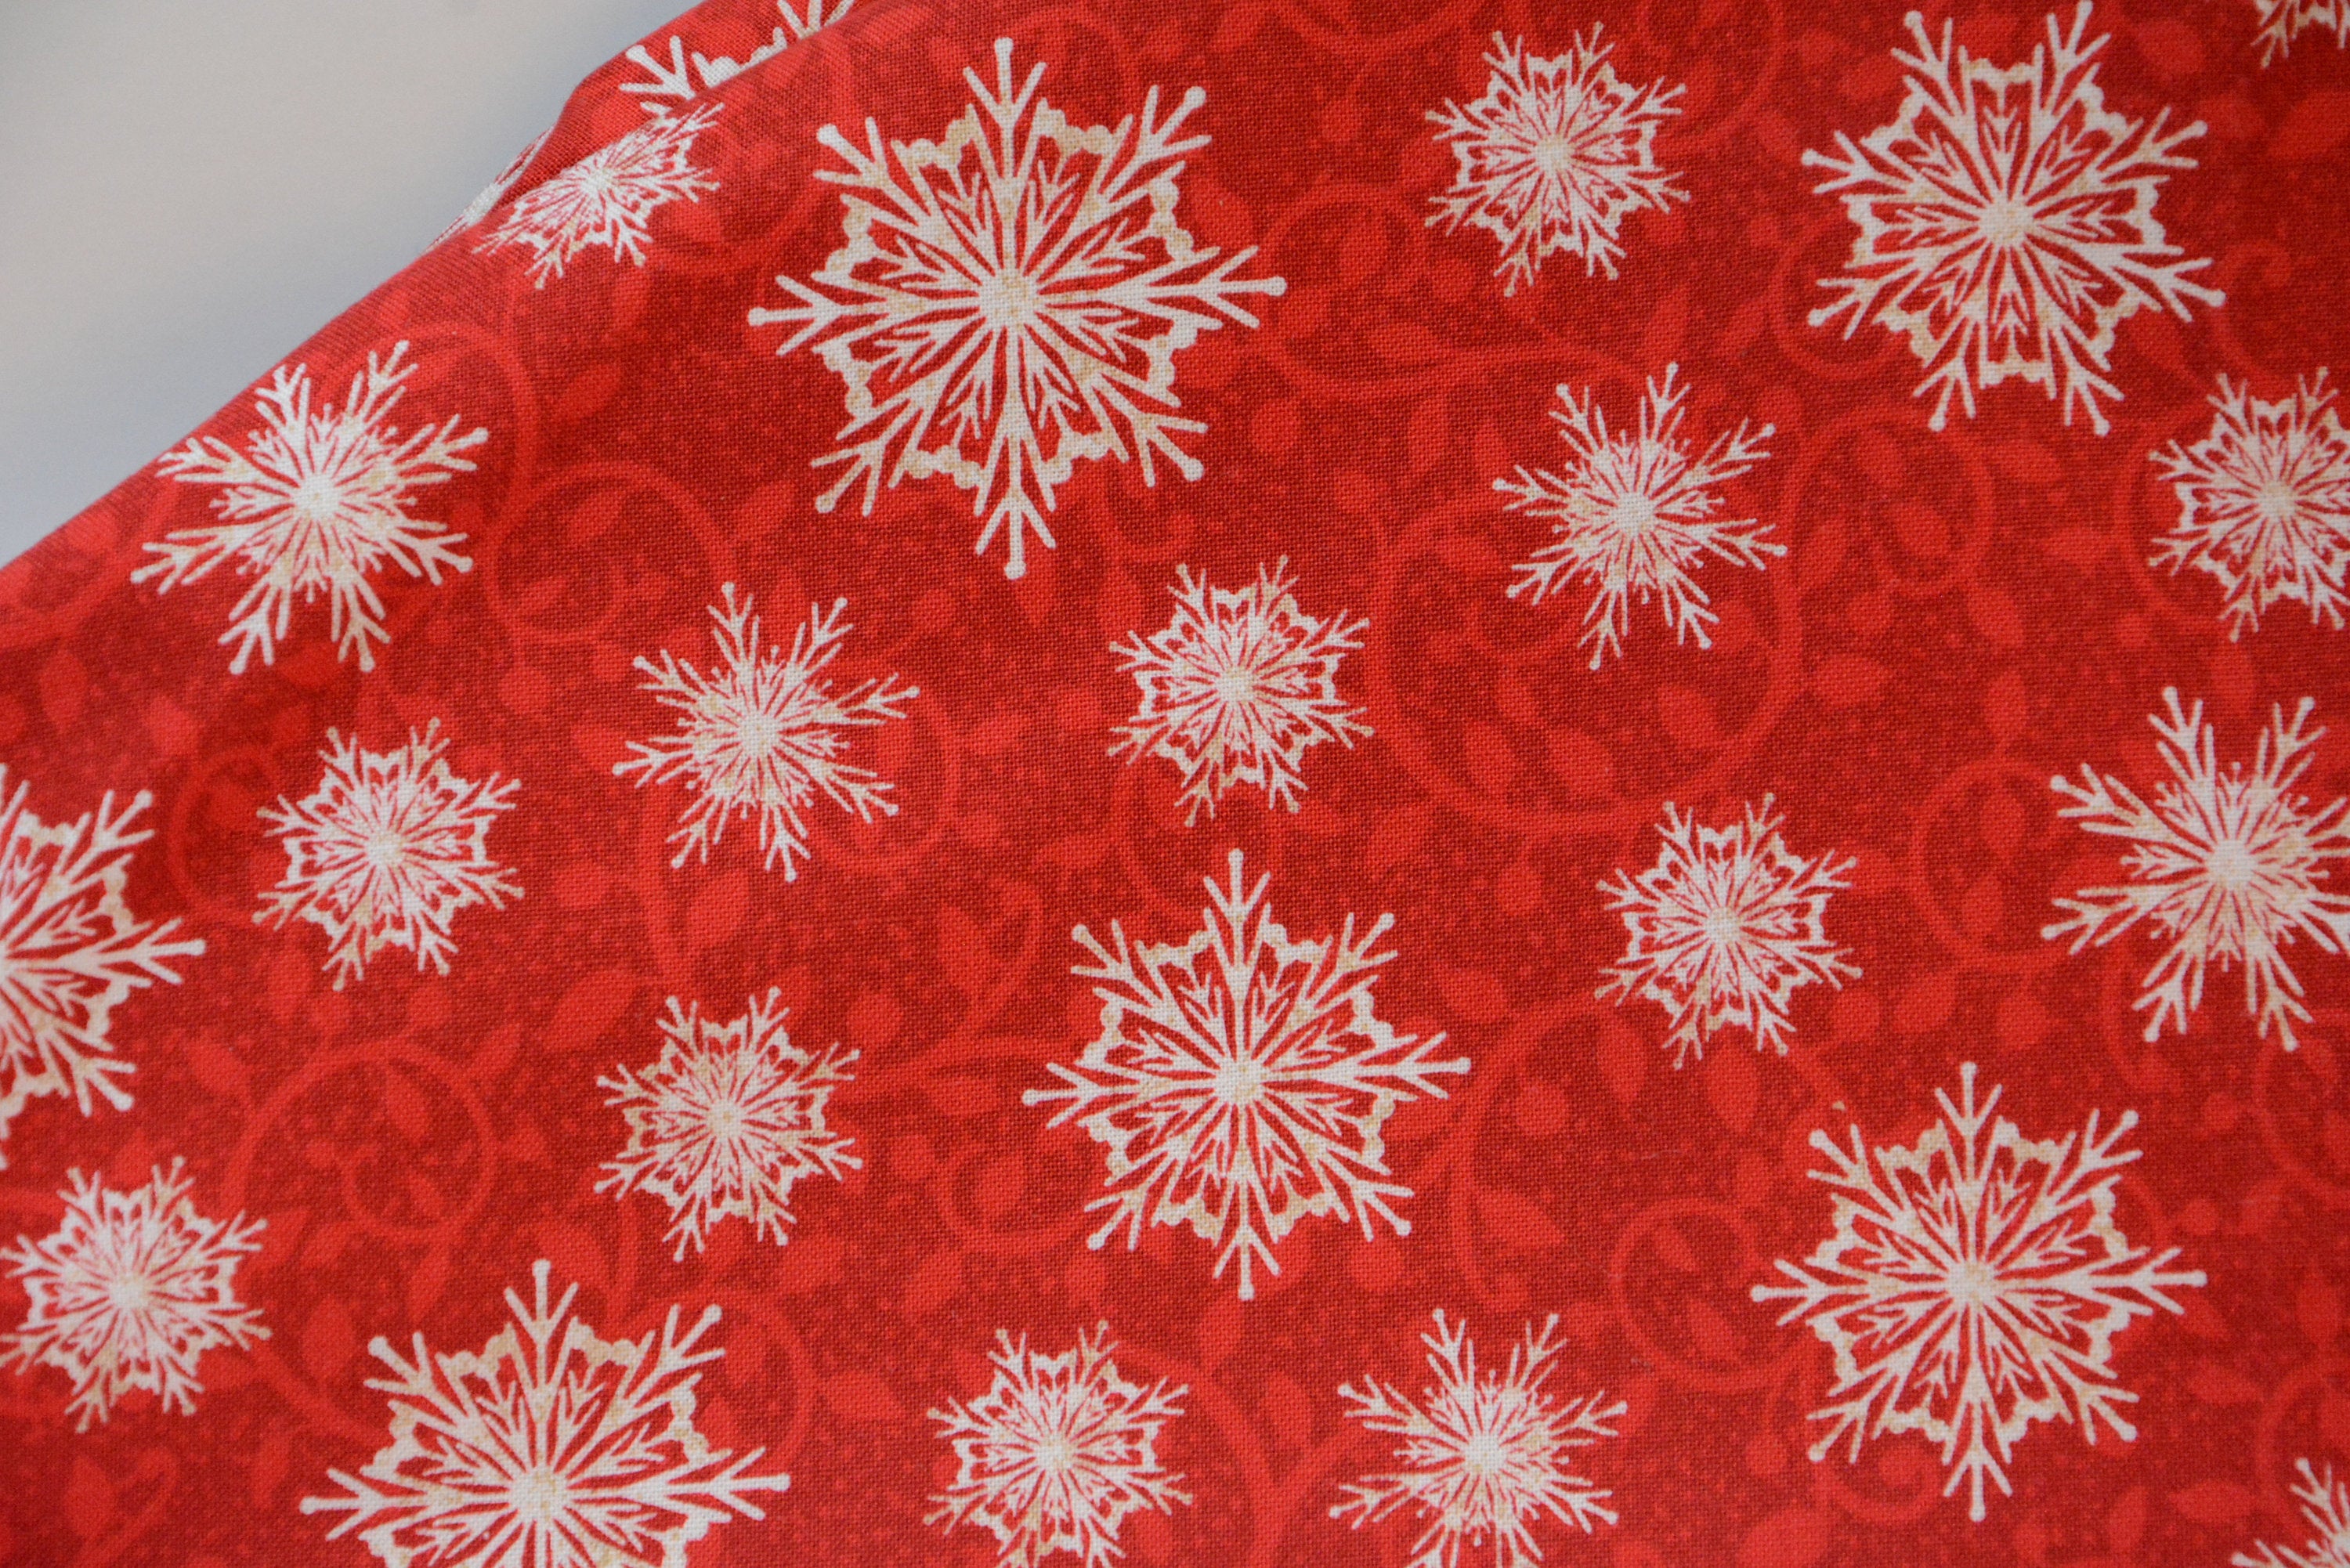 Christmas Snowflakes on Red